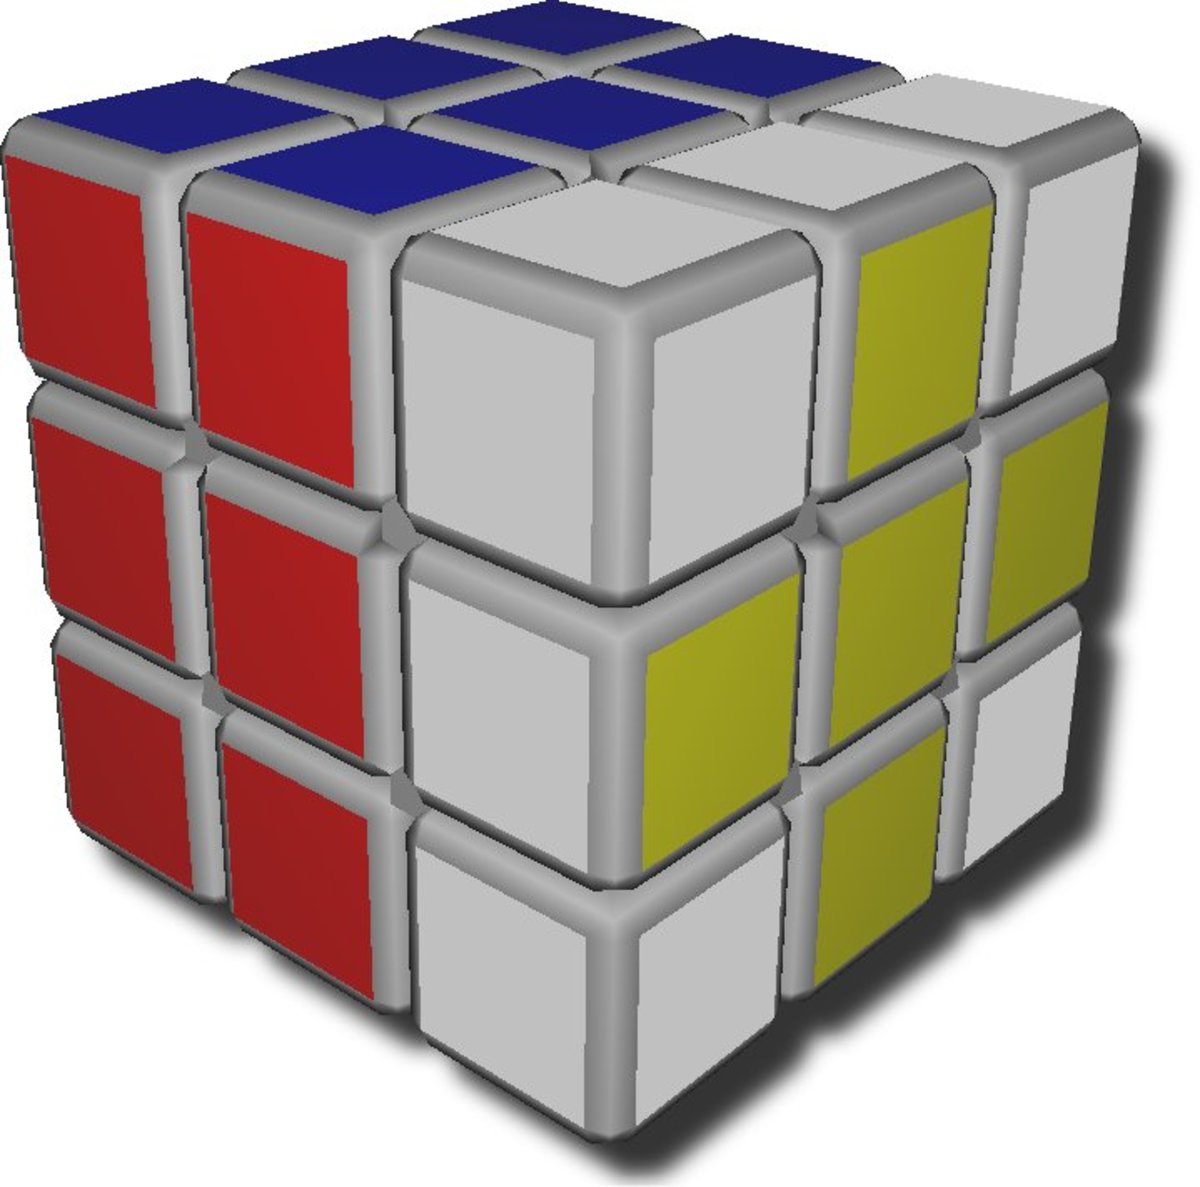 The Easiest Way to Solve a Rubik's Cube, With Step-by-Step Pictures & Video